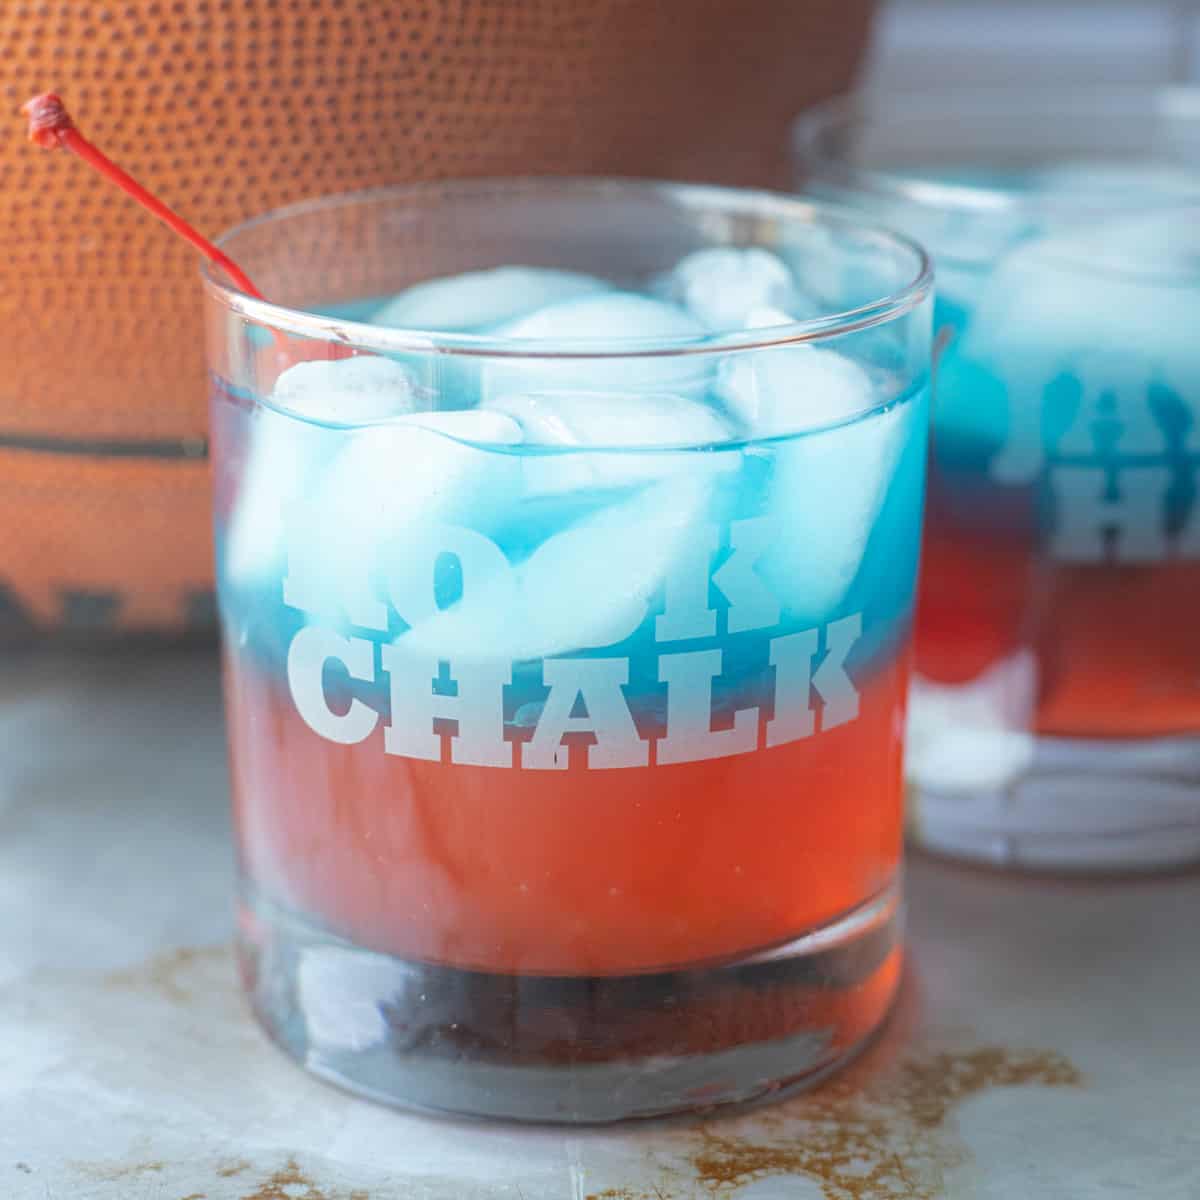 A blue and red Jayhawk cocktail sitting in front of a basketball.